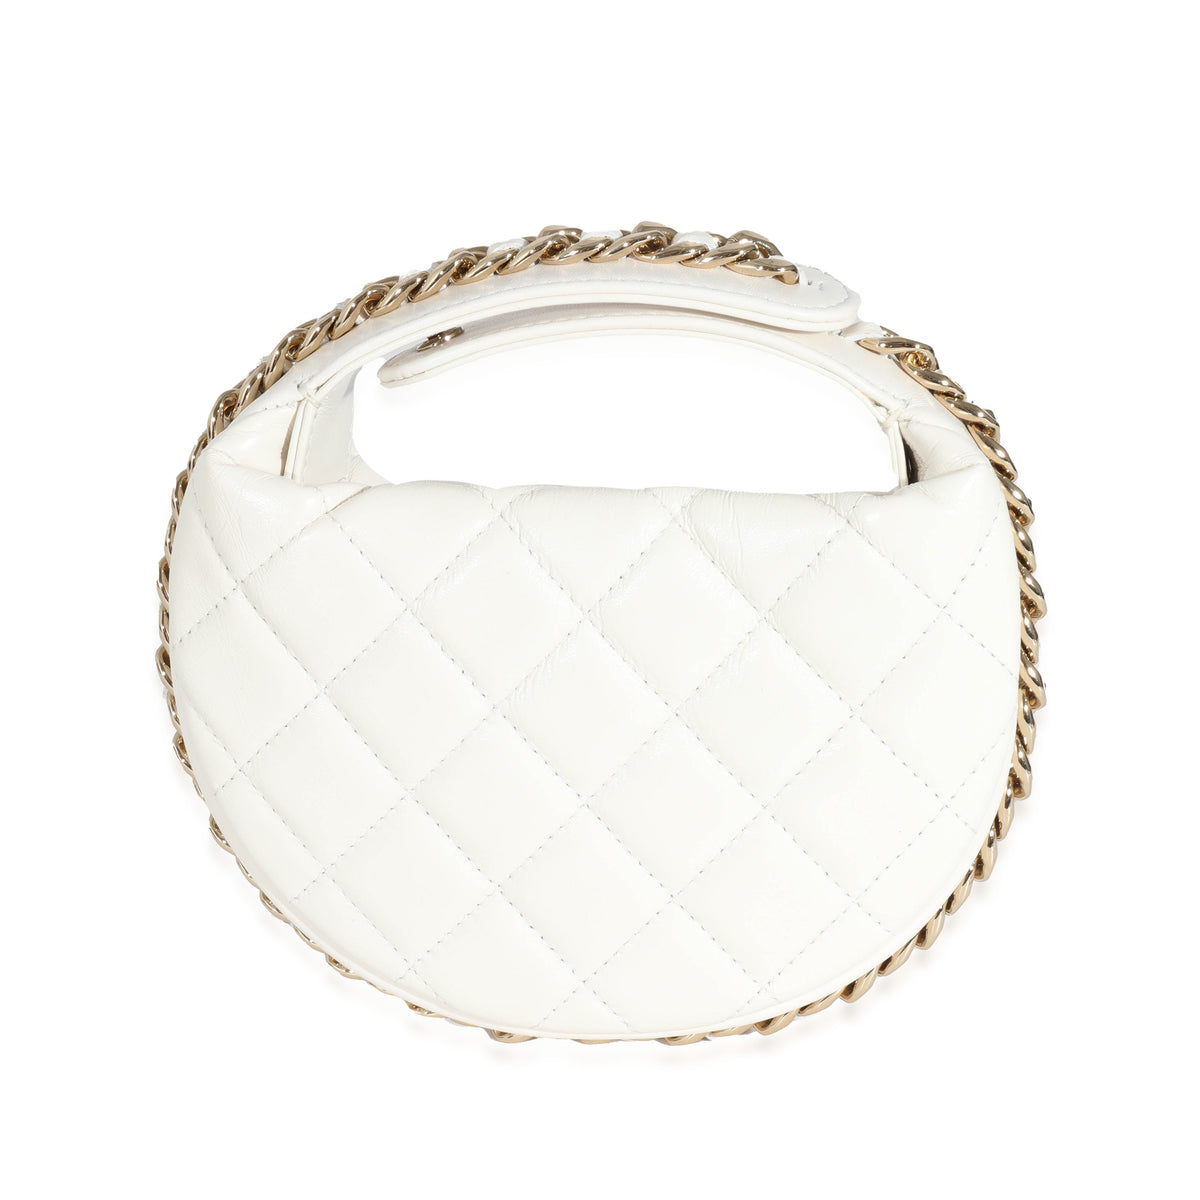 CHANEL ROUND CLUTCH WITH CHAIN